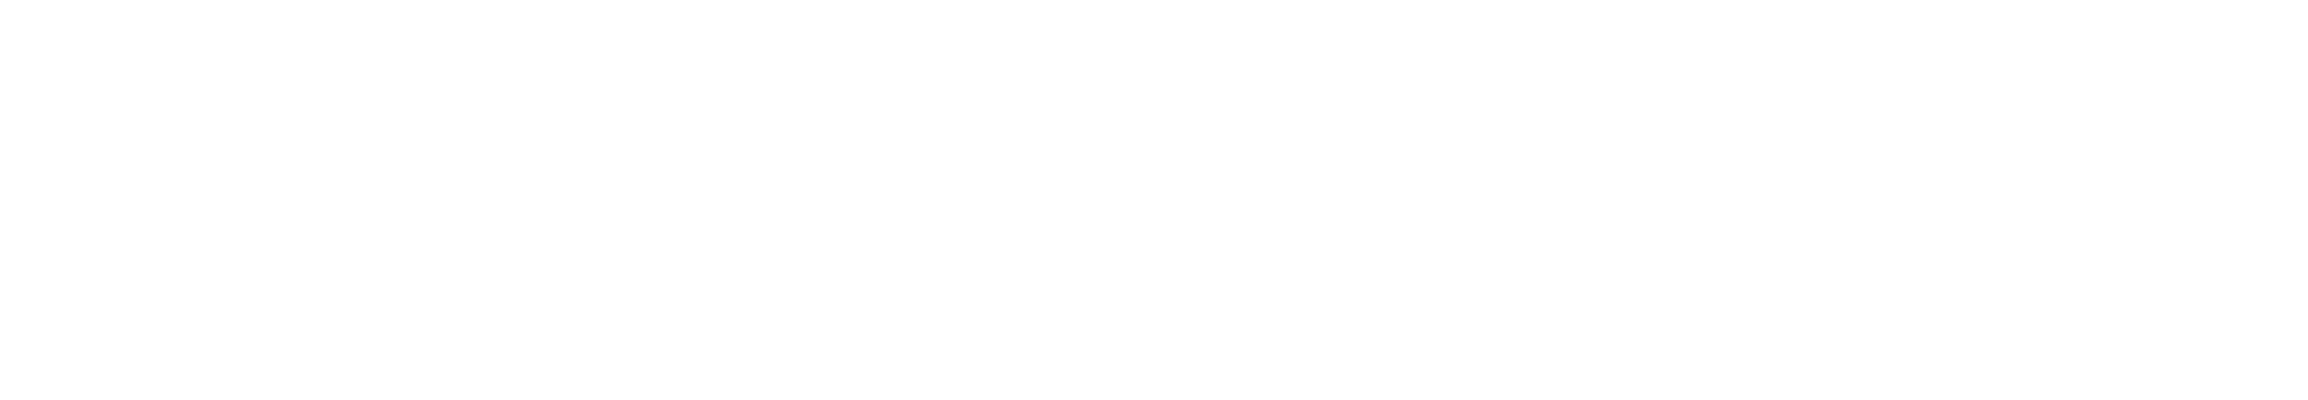 HBO_Max-Logo.wine-copy.png